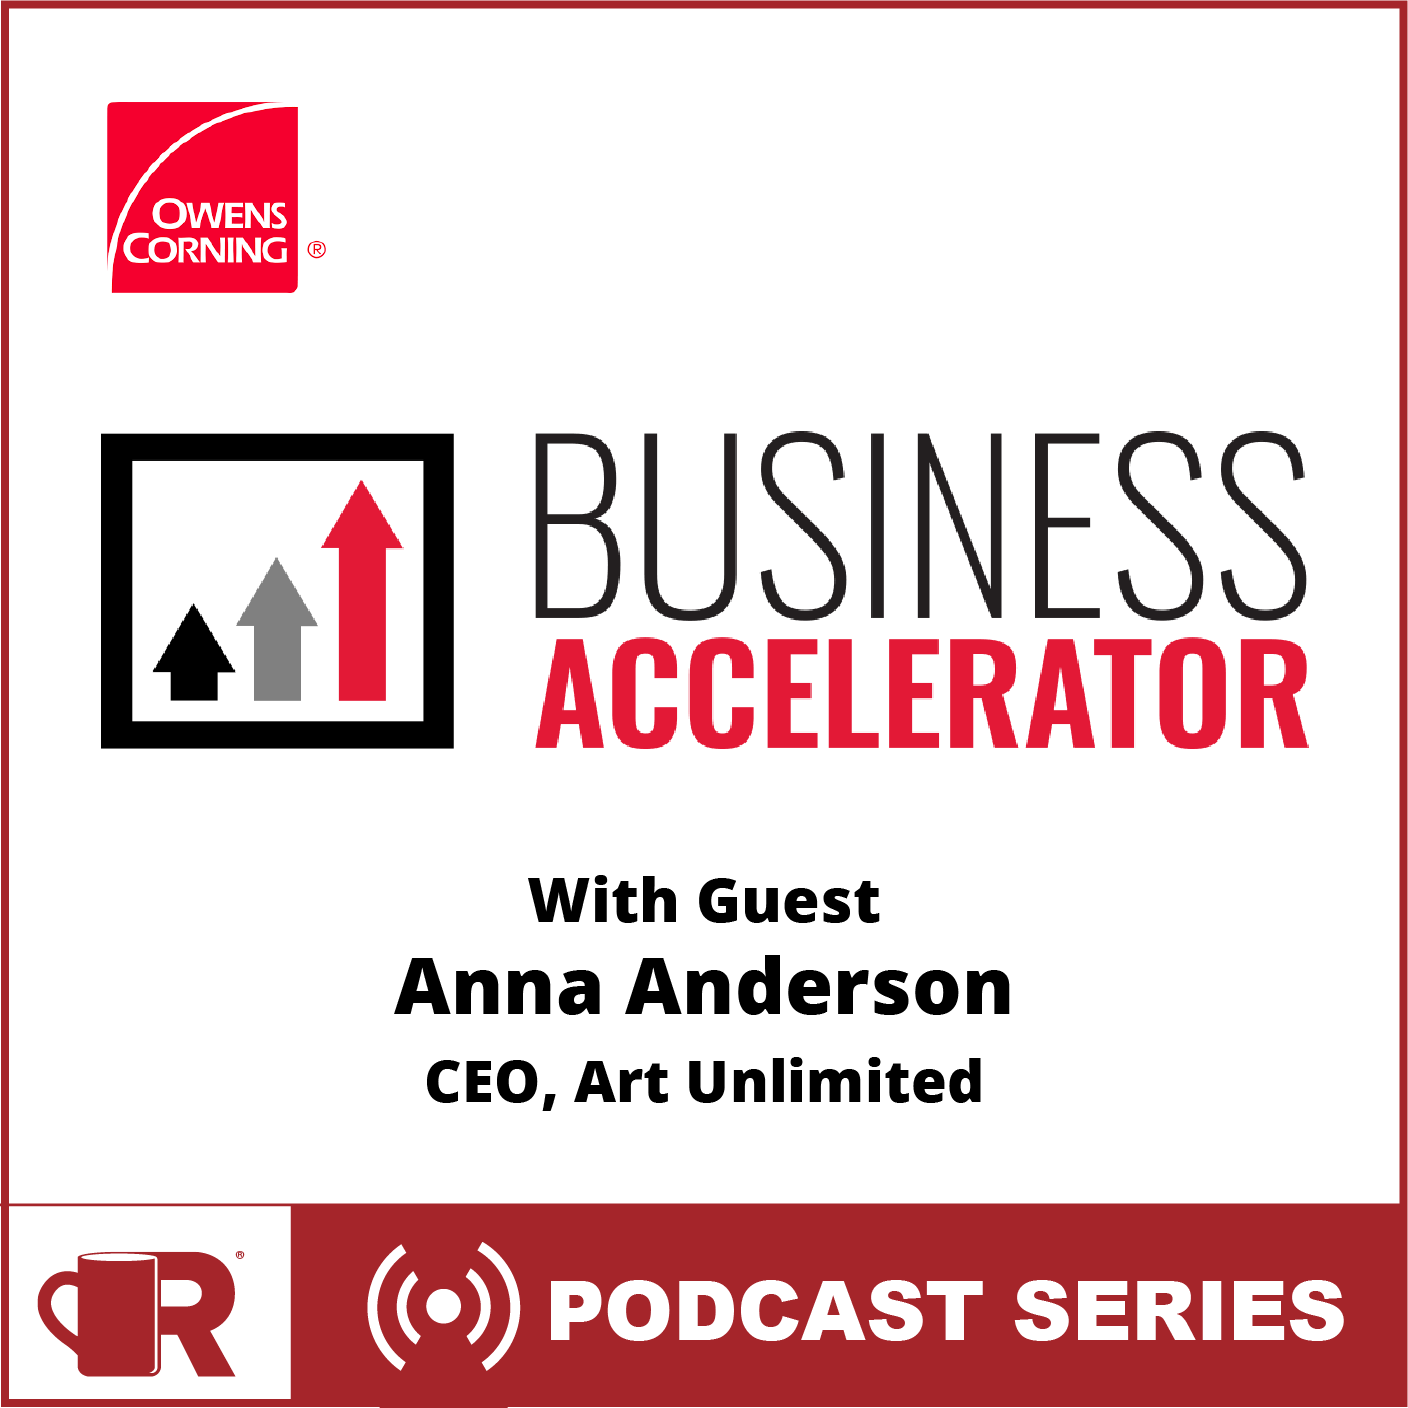 OC - S1:E1 Anna Anderson - Business Accelerators Podcast Sponsored by Owens Corning